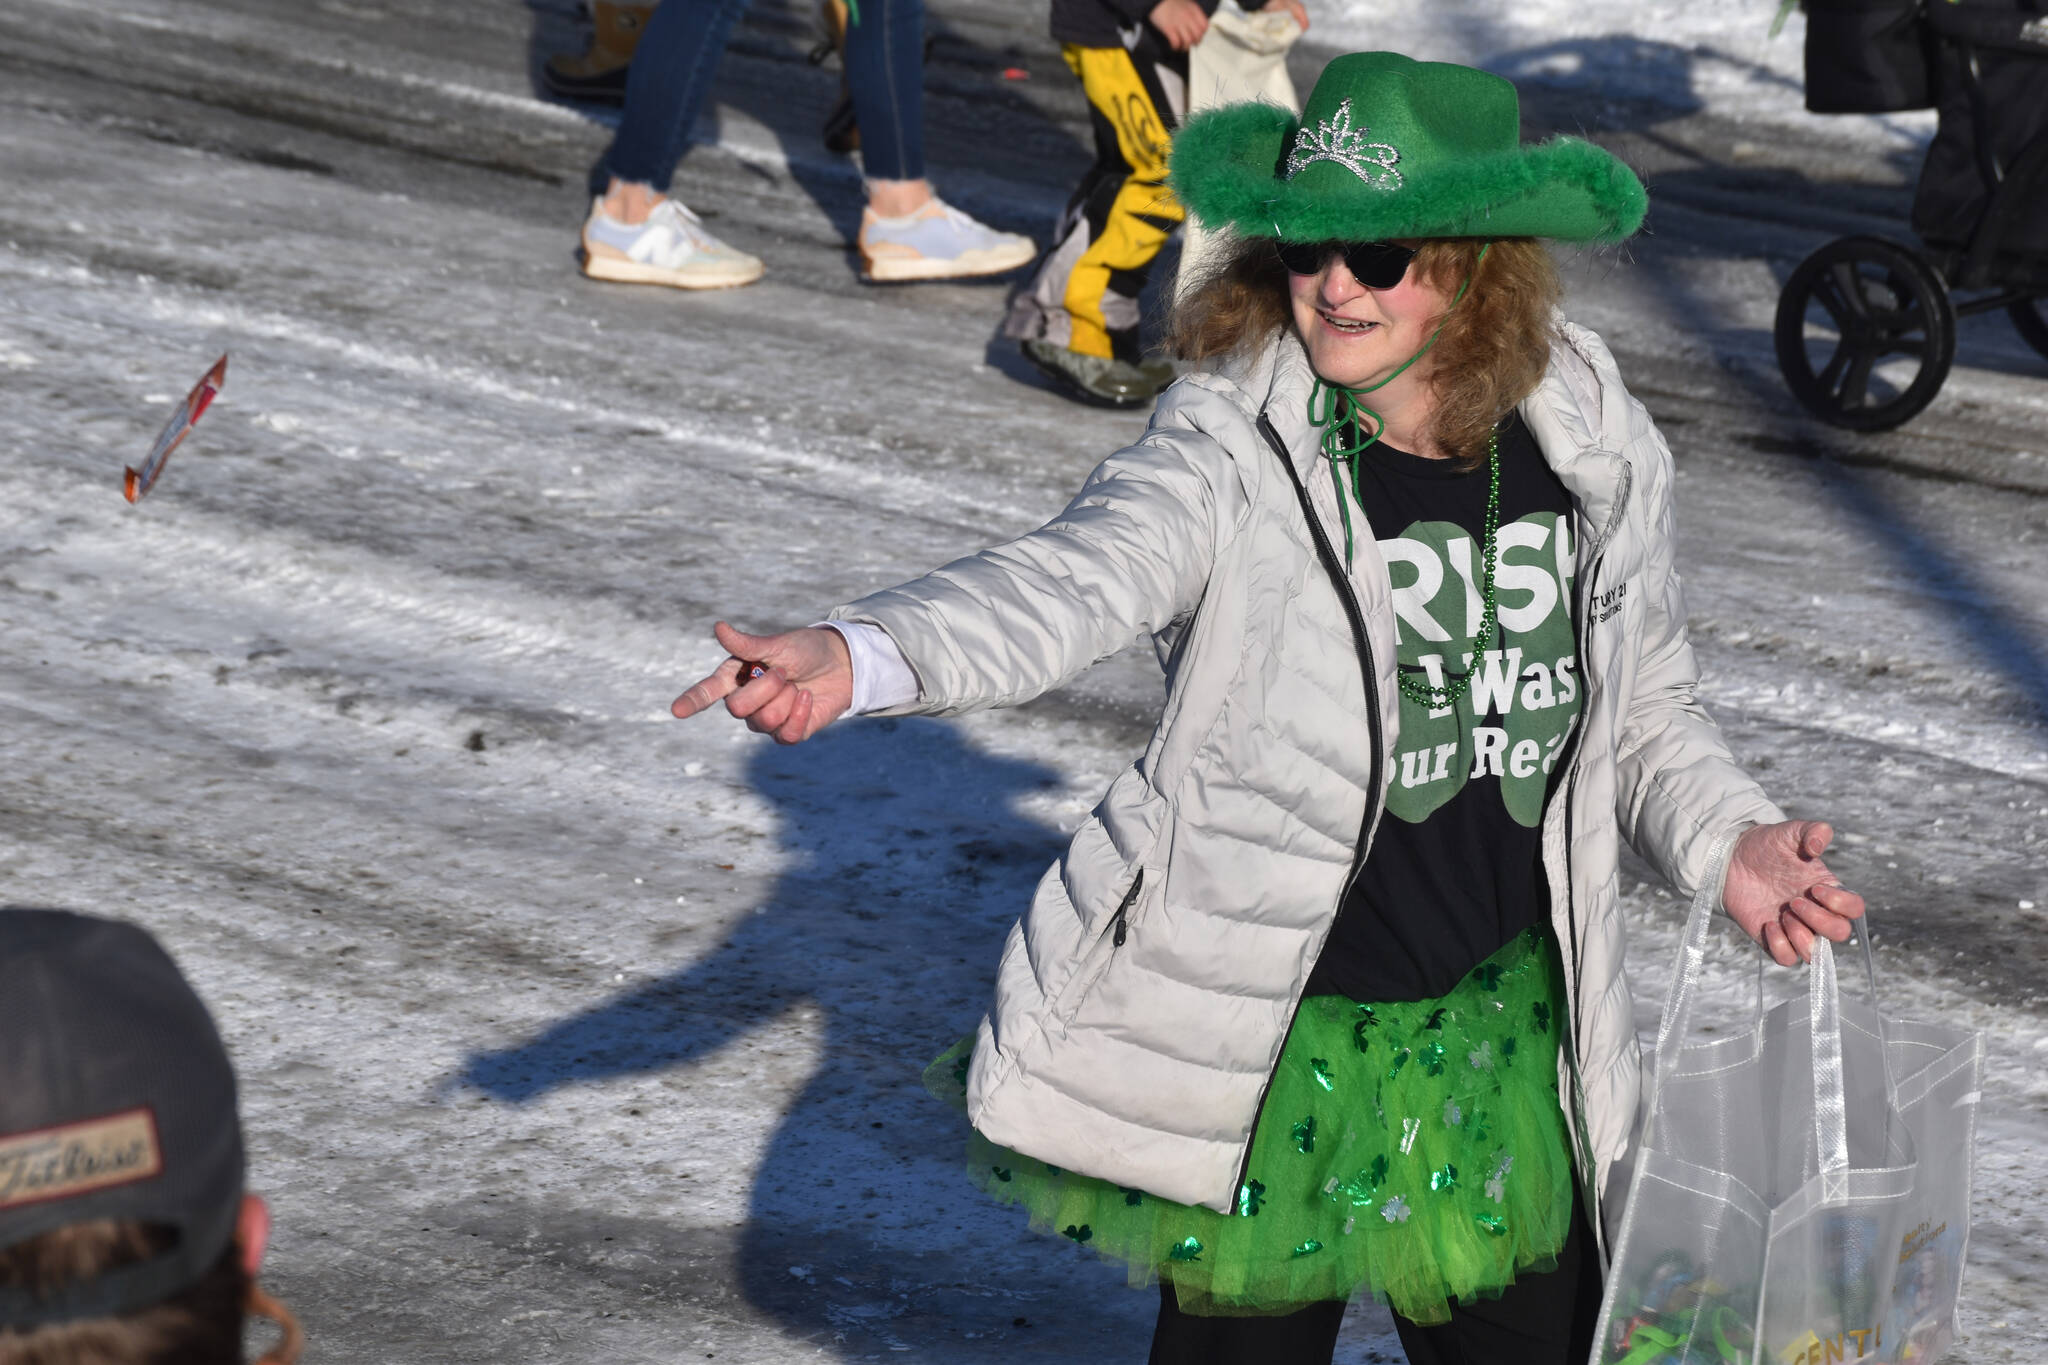 Candy is thrown as the 32nd annual Sweeney’s St. Patrick’s Day Parade proceeds down Fireweed Street in Soldotna, Alaska on Friday, March 17, 2023. (Jake Dye/Peninsula Clarion)